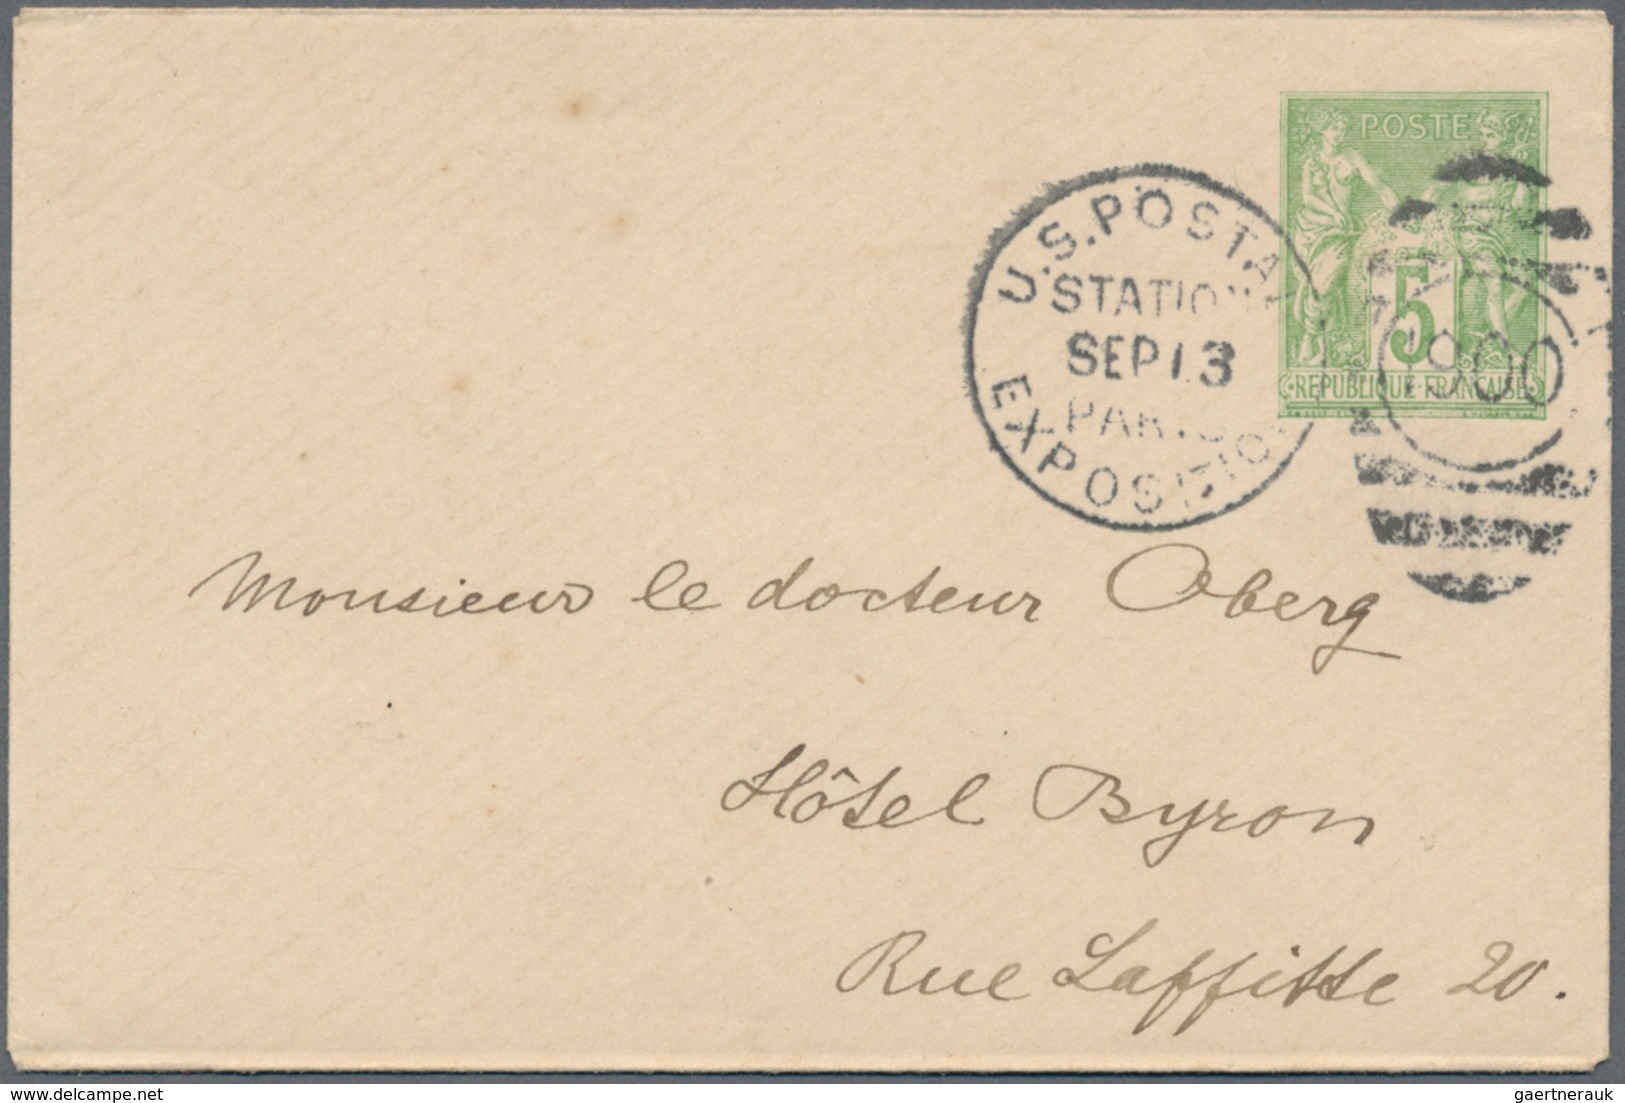 Frankreich - Stempel: 1900, "U. S. POSTAGE STATION PARIS EXPOSITION" Circle Cancel And "1900" On 5 C - 1801-1848: Voorlopers XIX